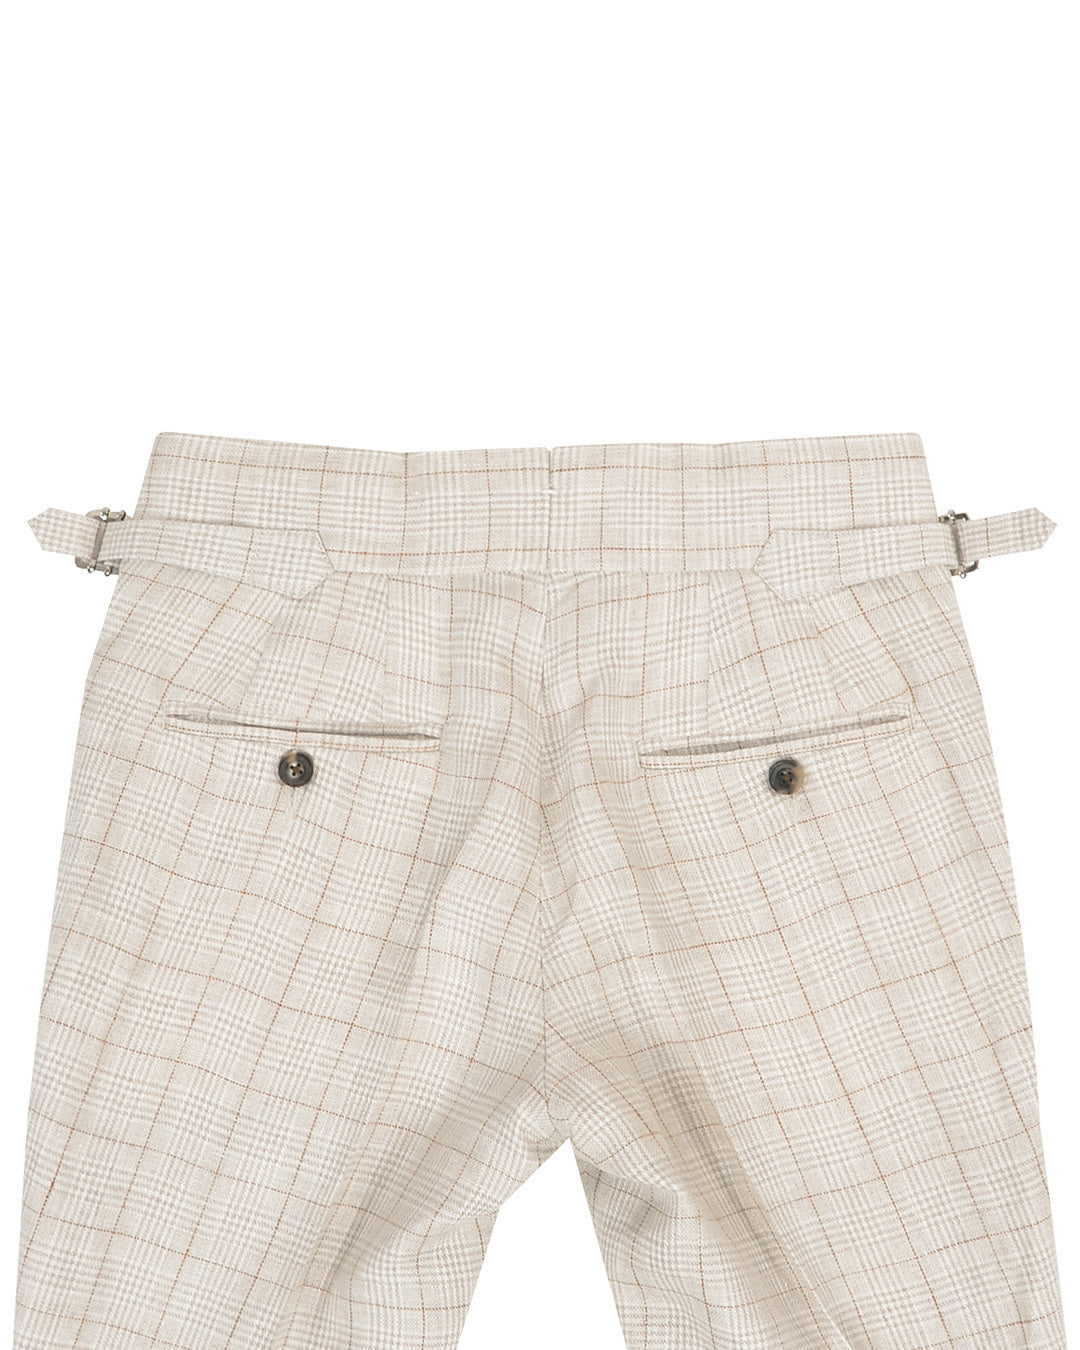 Back view of custom linen pants for men by Luxire in light tan plaid